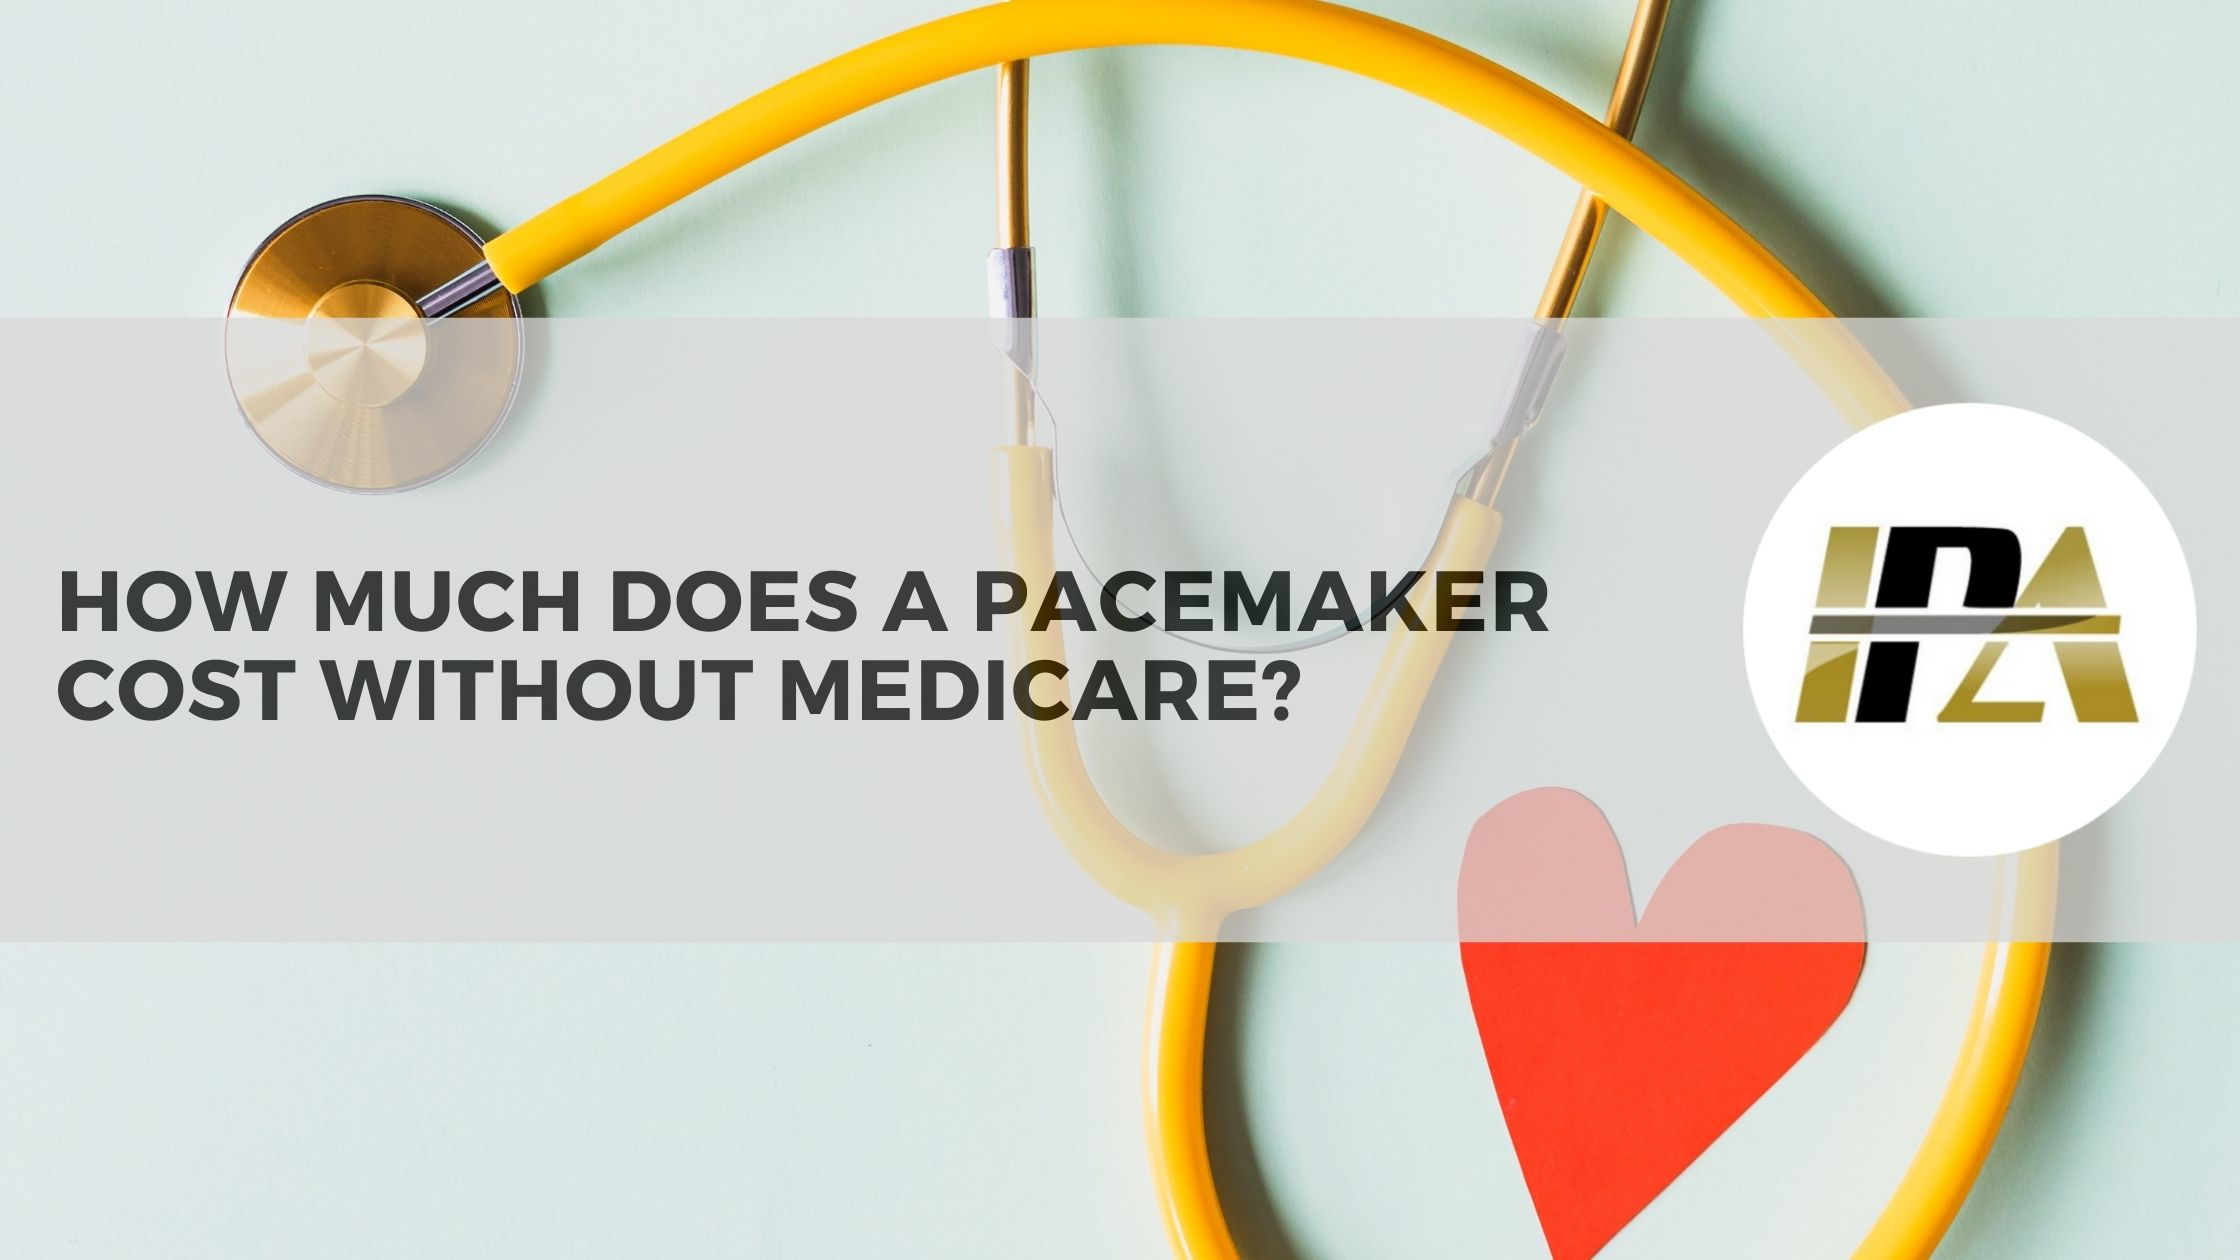 How Much Does a Pacemaker Cost Without Medicare